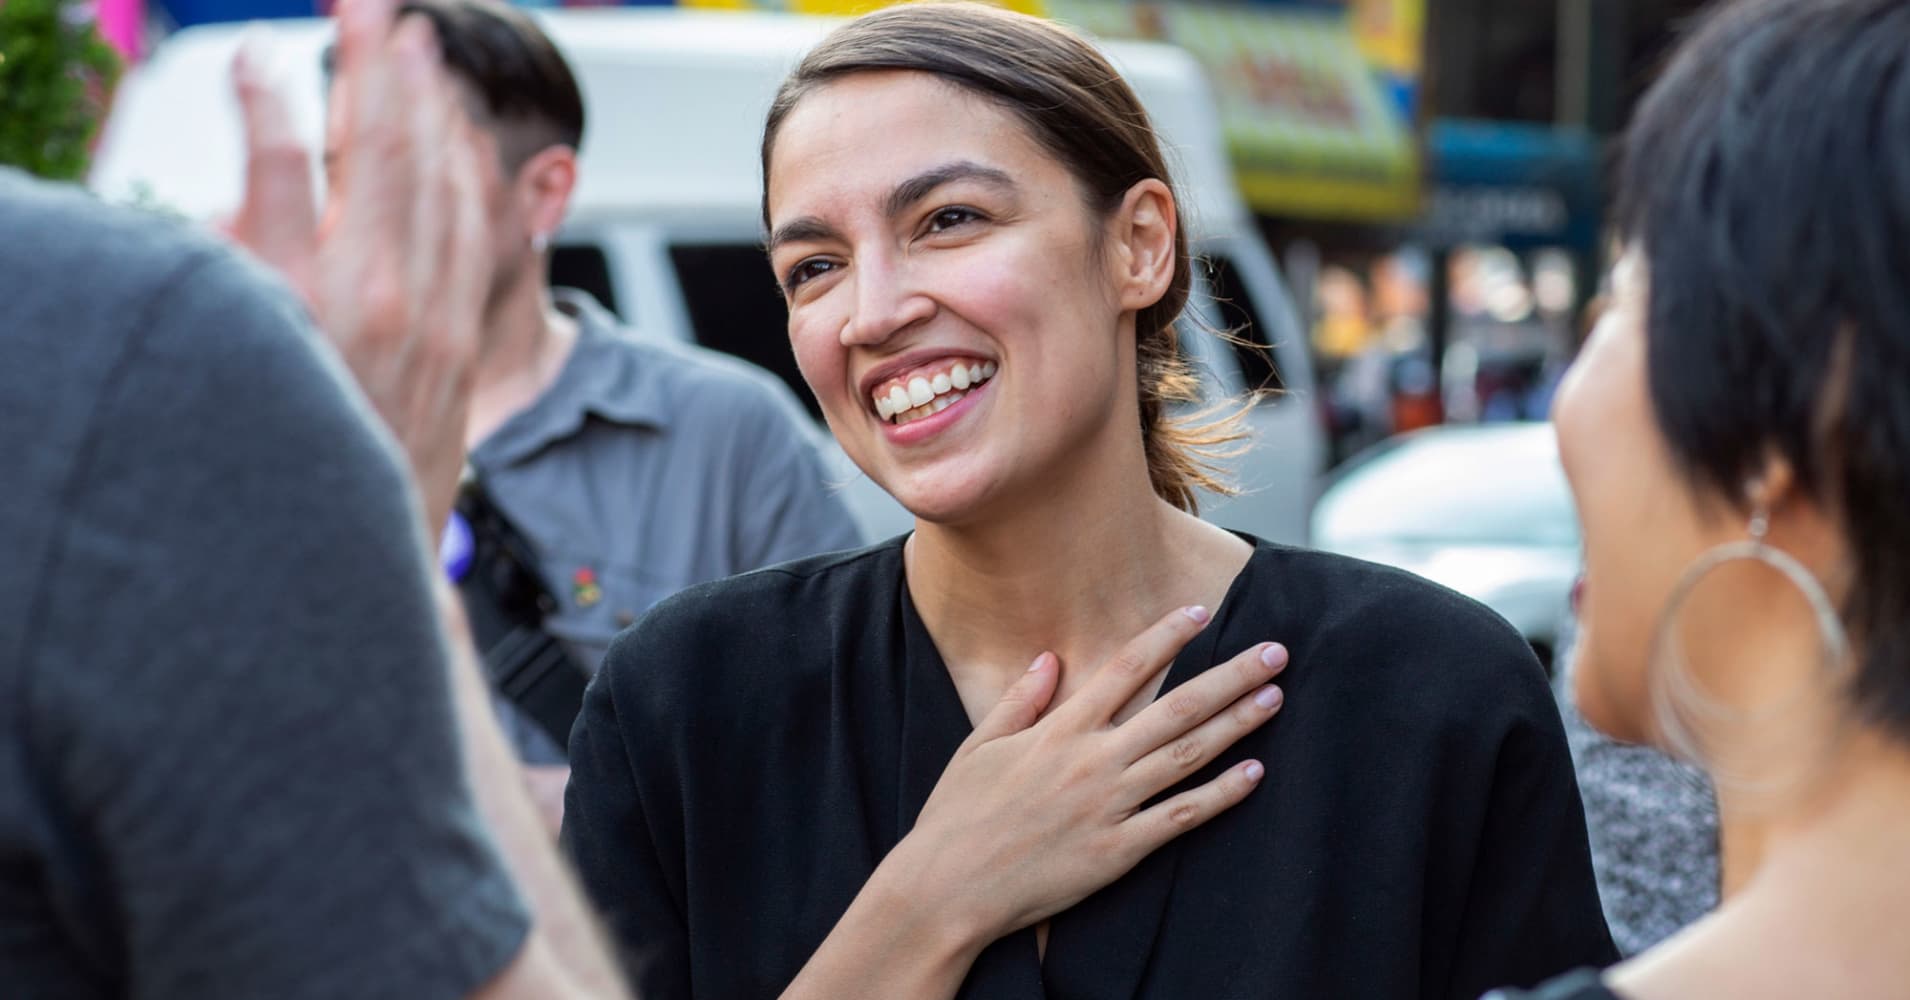 Alexandria Ocasio-Cortez, Rashida Tlaib and 12 others who made history in the midterm election